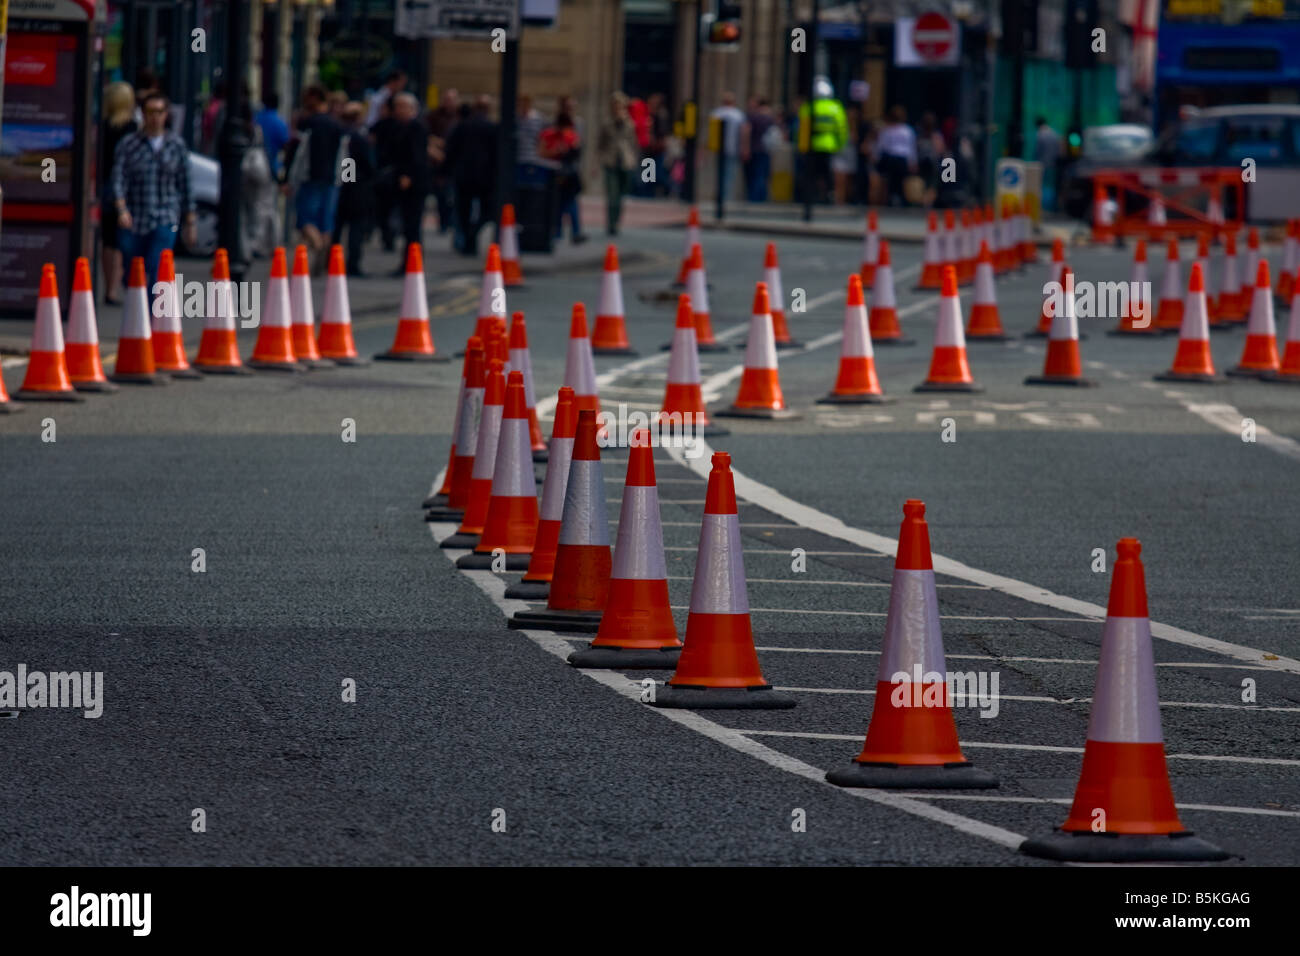 A street in Manchester with certain lanes coned off due to the 2008 Labour Party Confrence. Stock Photo